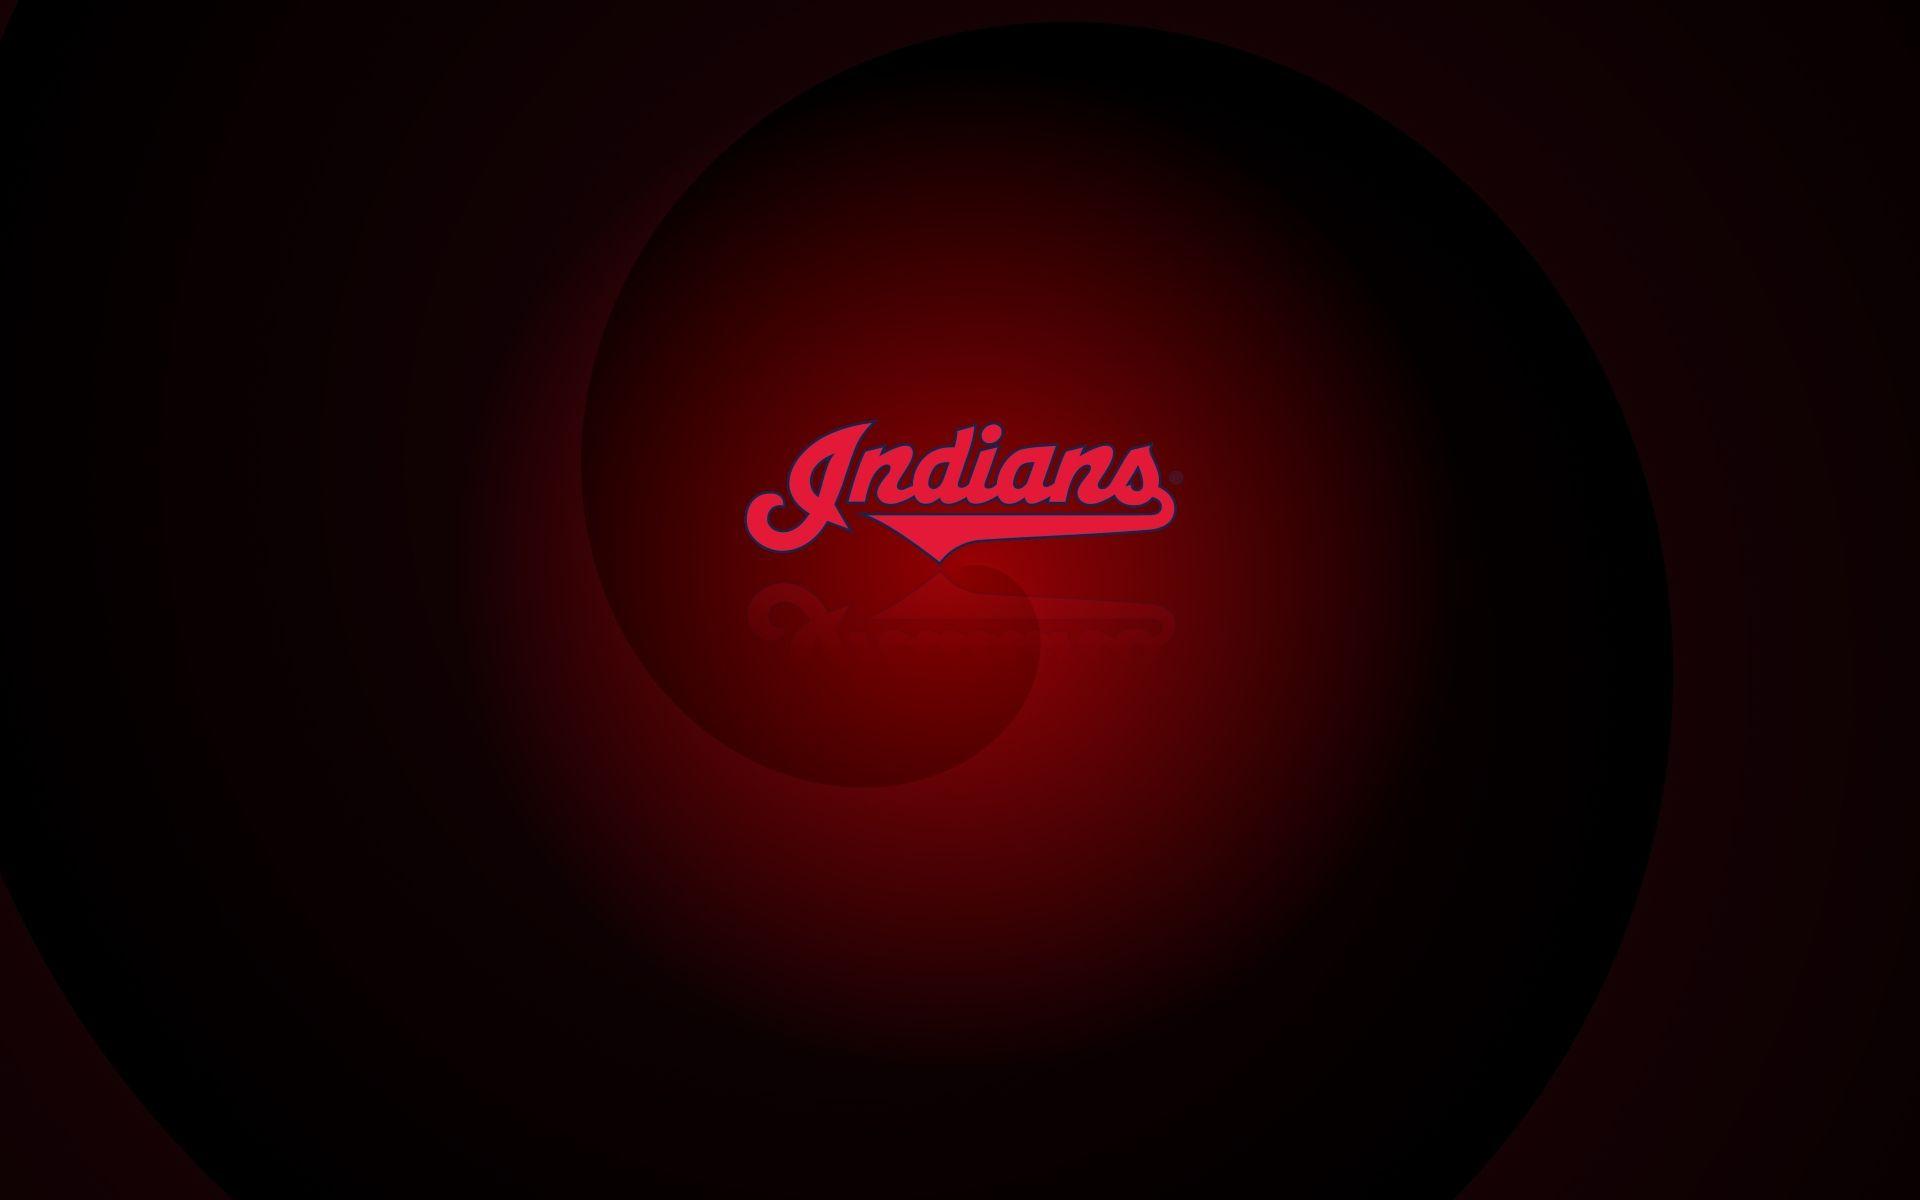 Download Free Cleveland Indians Background